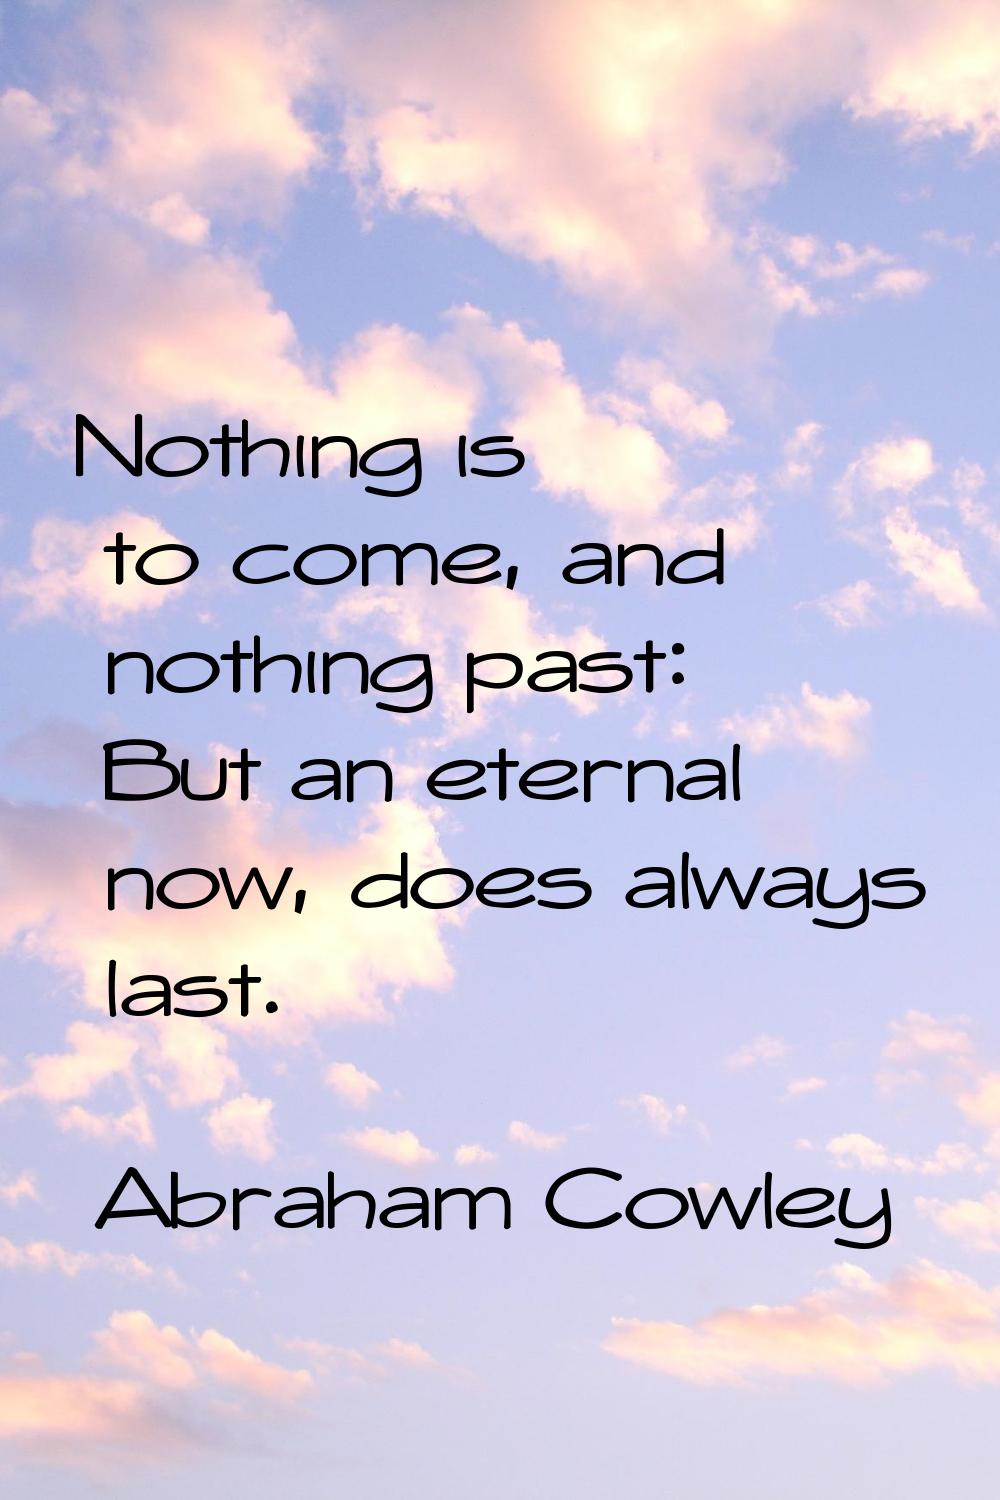 Nothing is to come, and nothing past: But an eternal now, does always last.